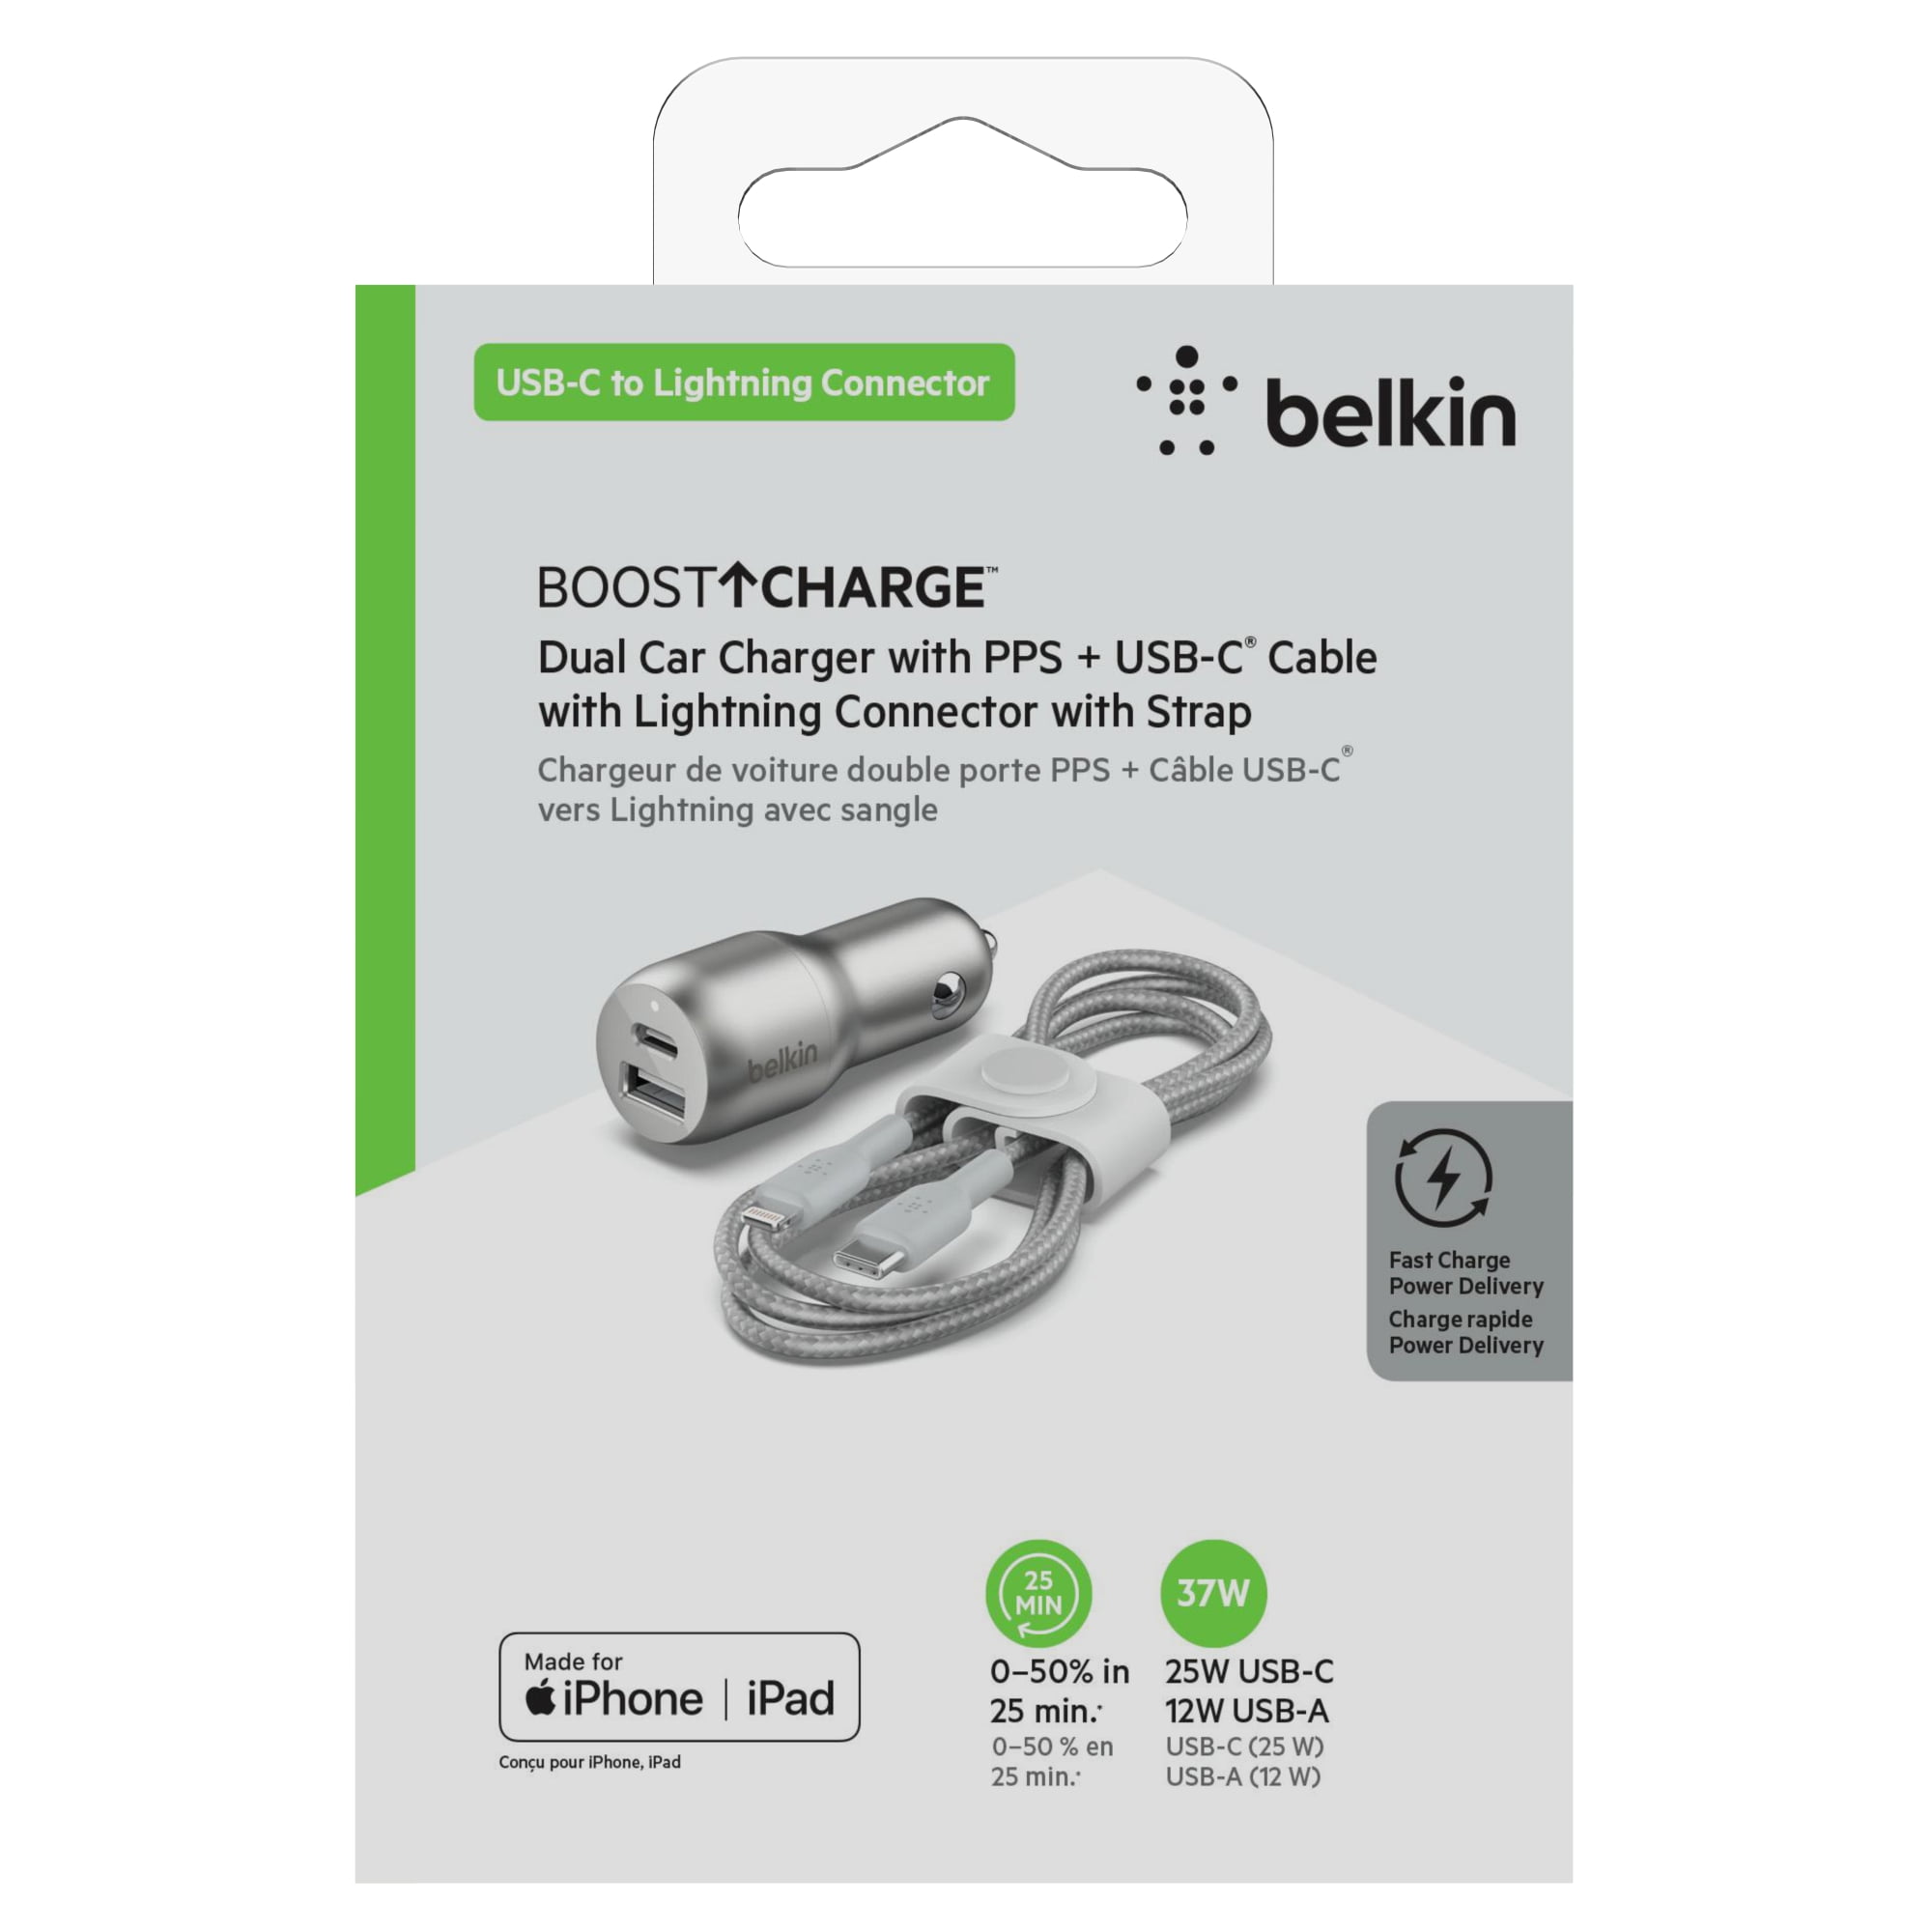 Chargeur Voiture USB-C 20W Charge Rapide Power Delivery, Belkin